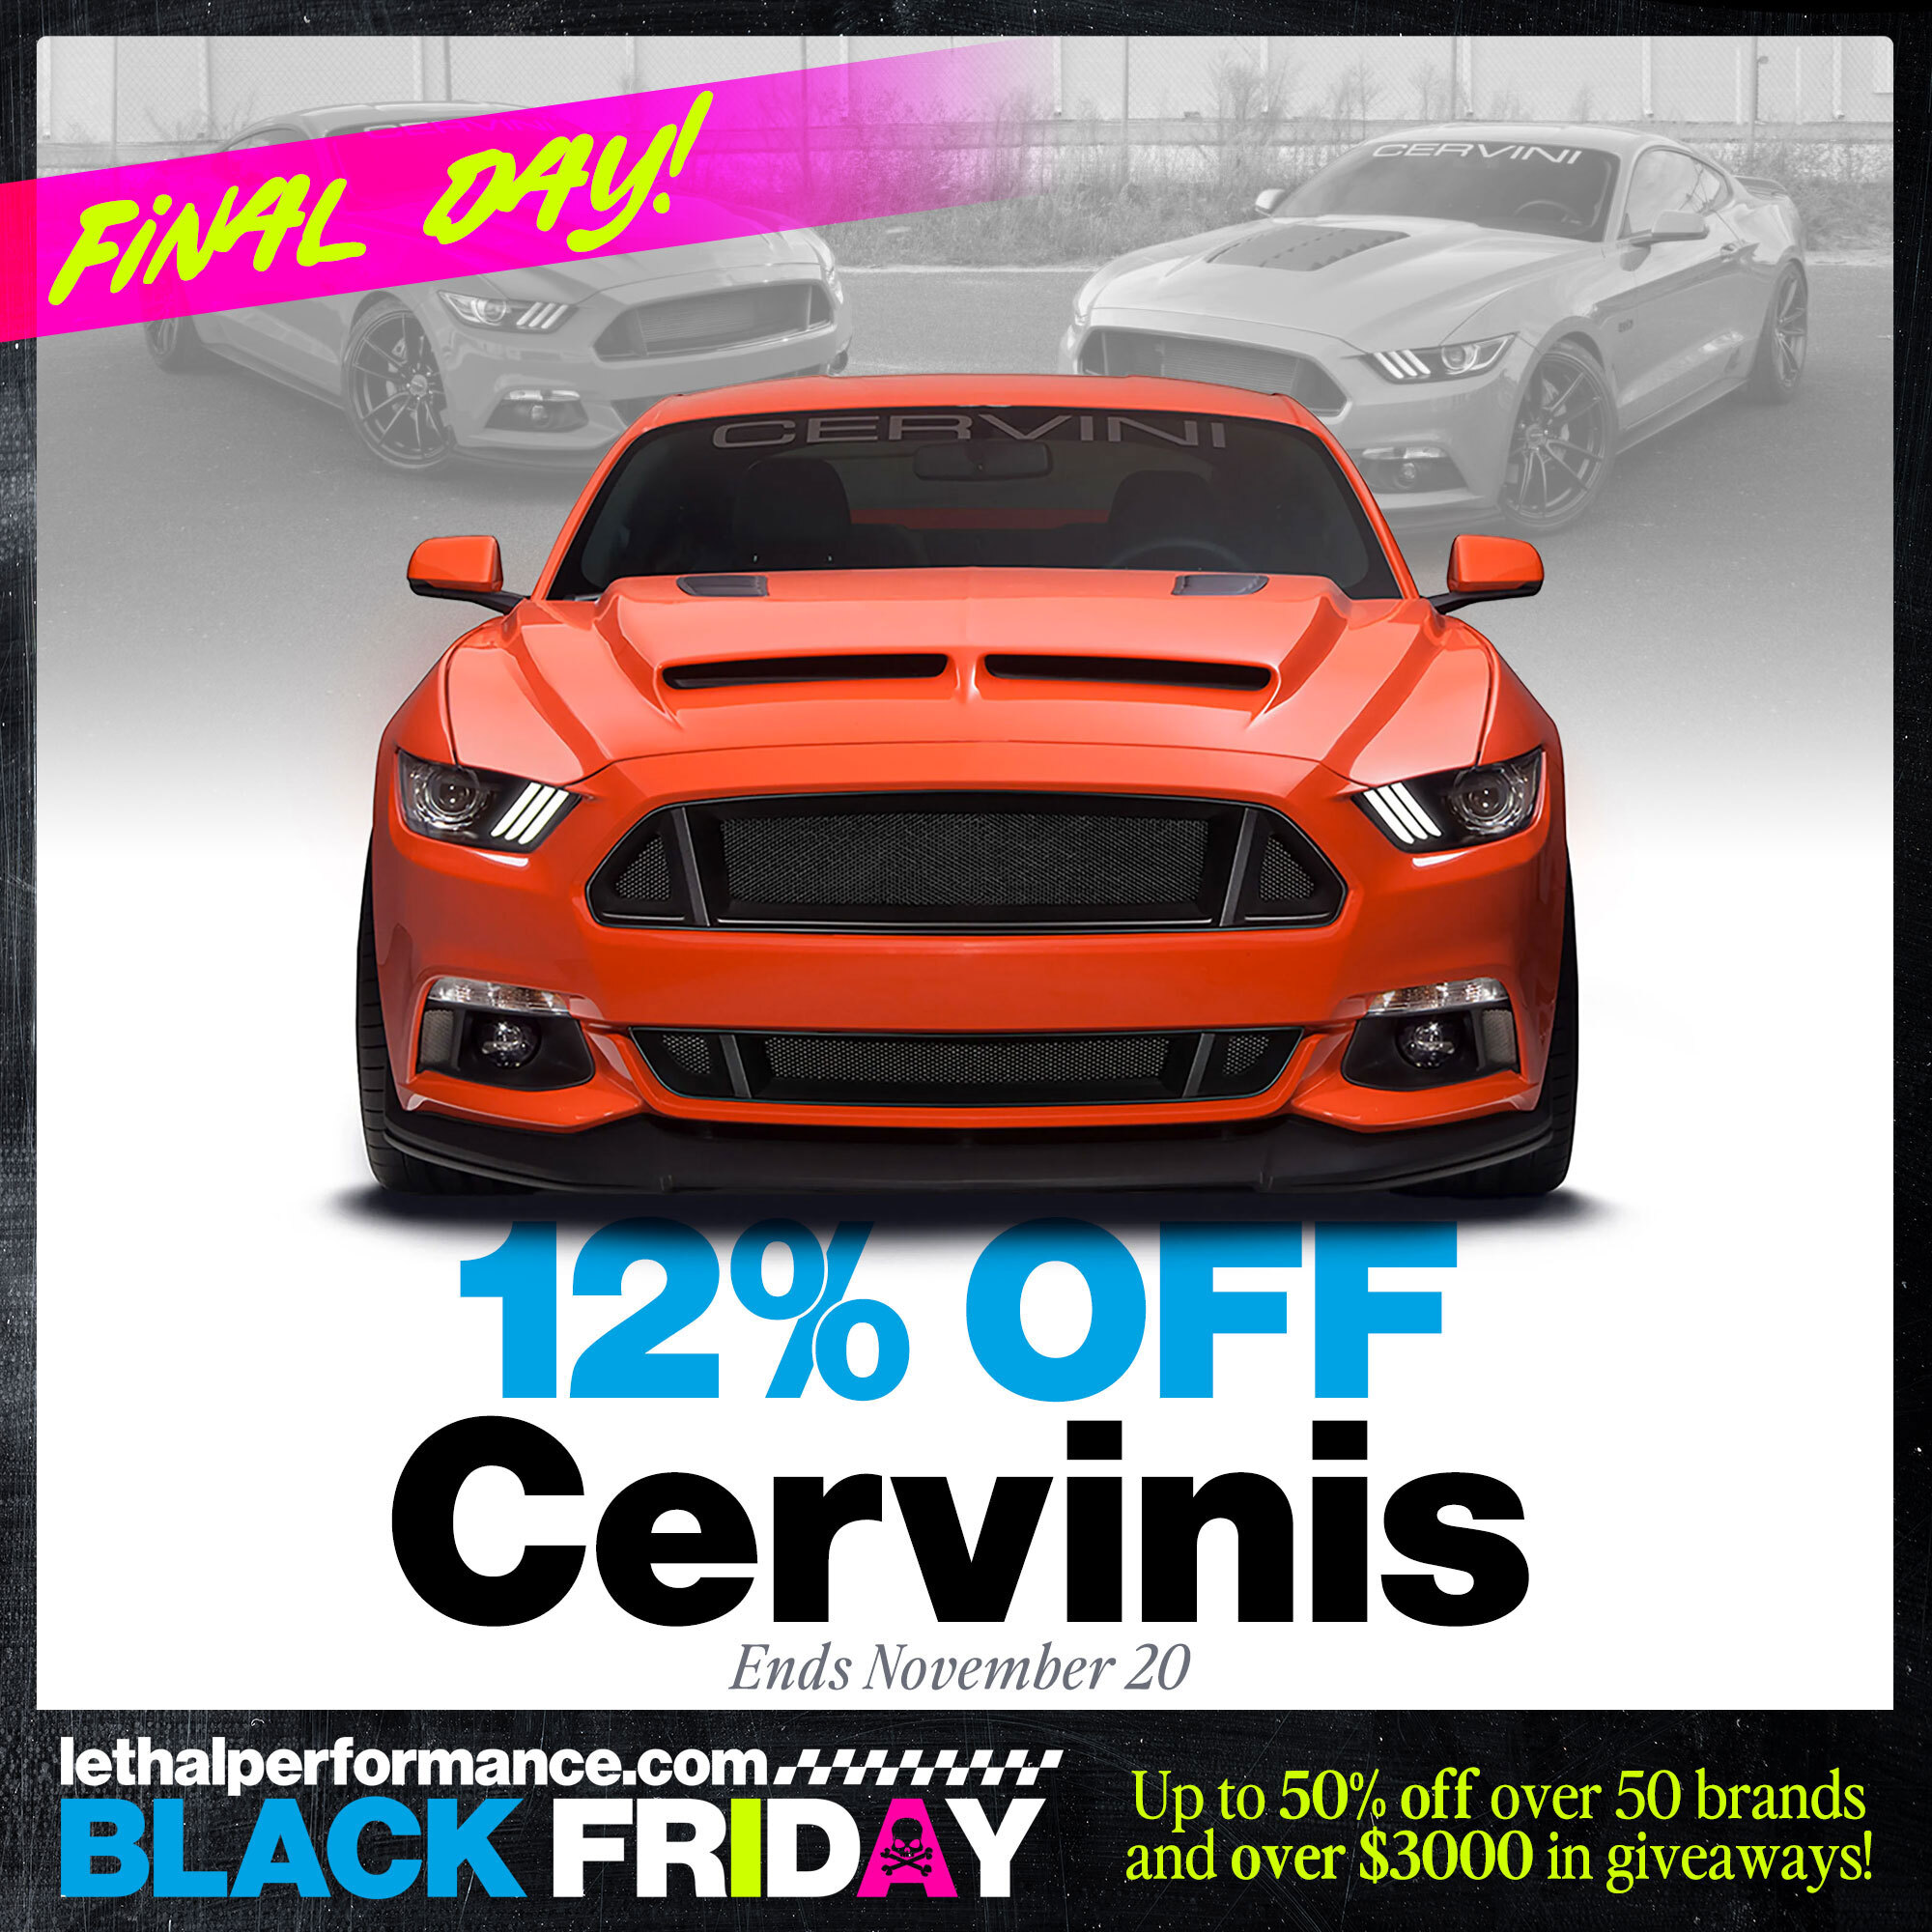 S650 Mustang Black Friday starts NOW! Up to 50% off! Cervins_Mustang_LastChance